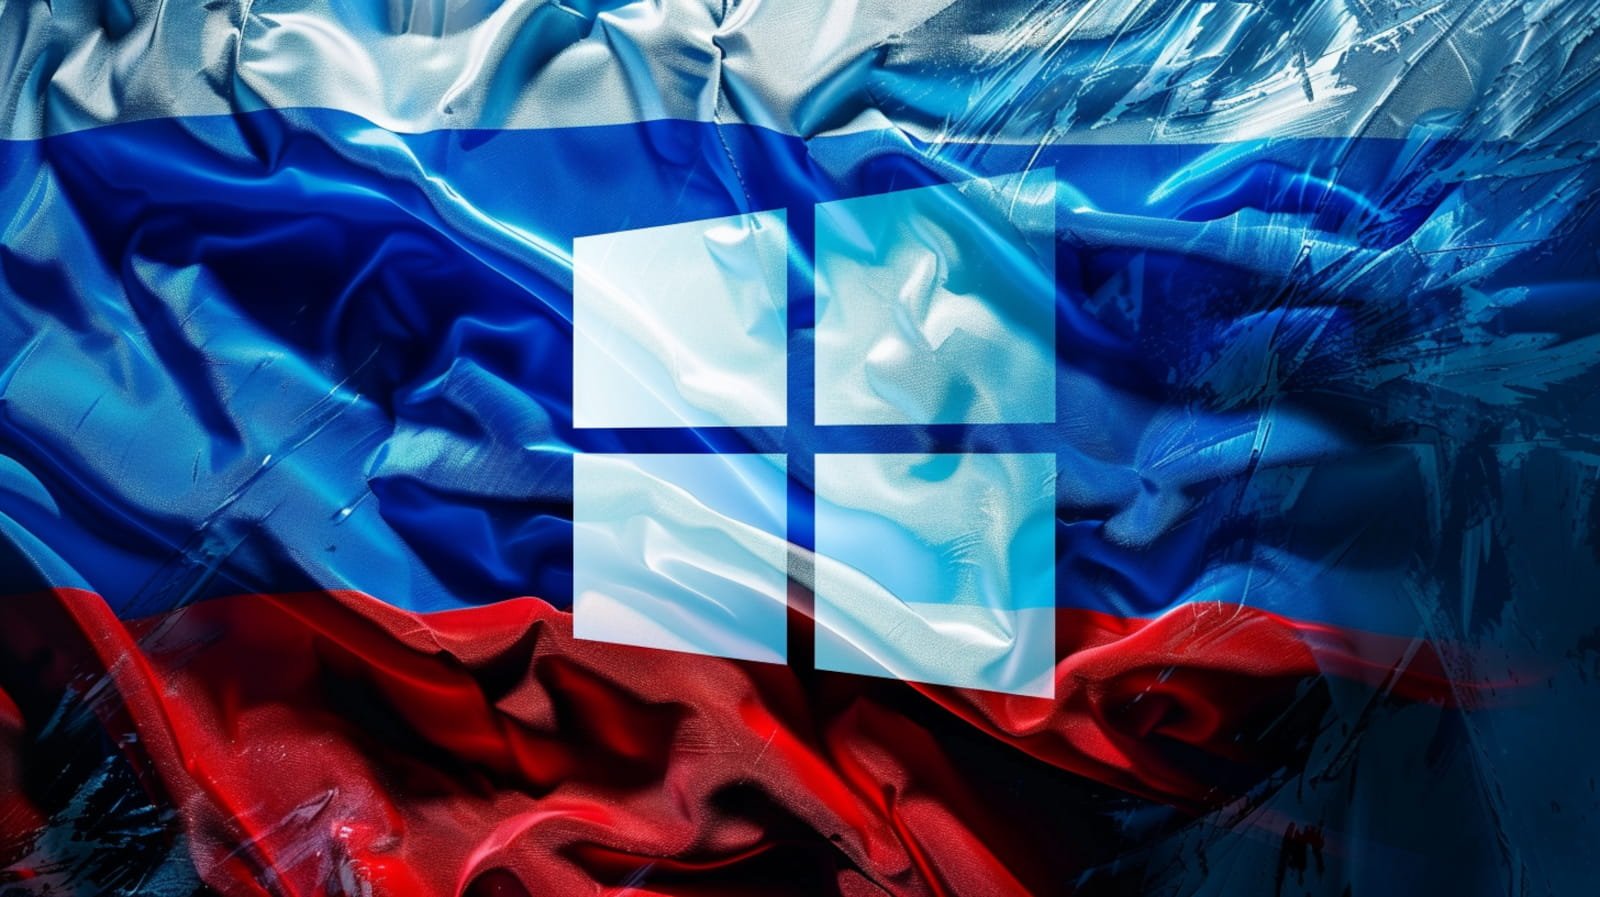 Microsoft: APT28 hackers exploit Windows flaw reported by NSA